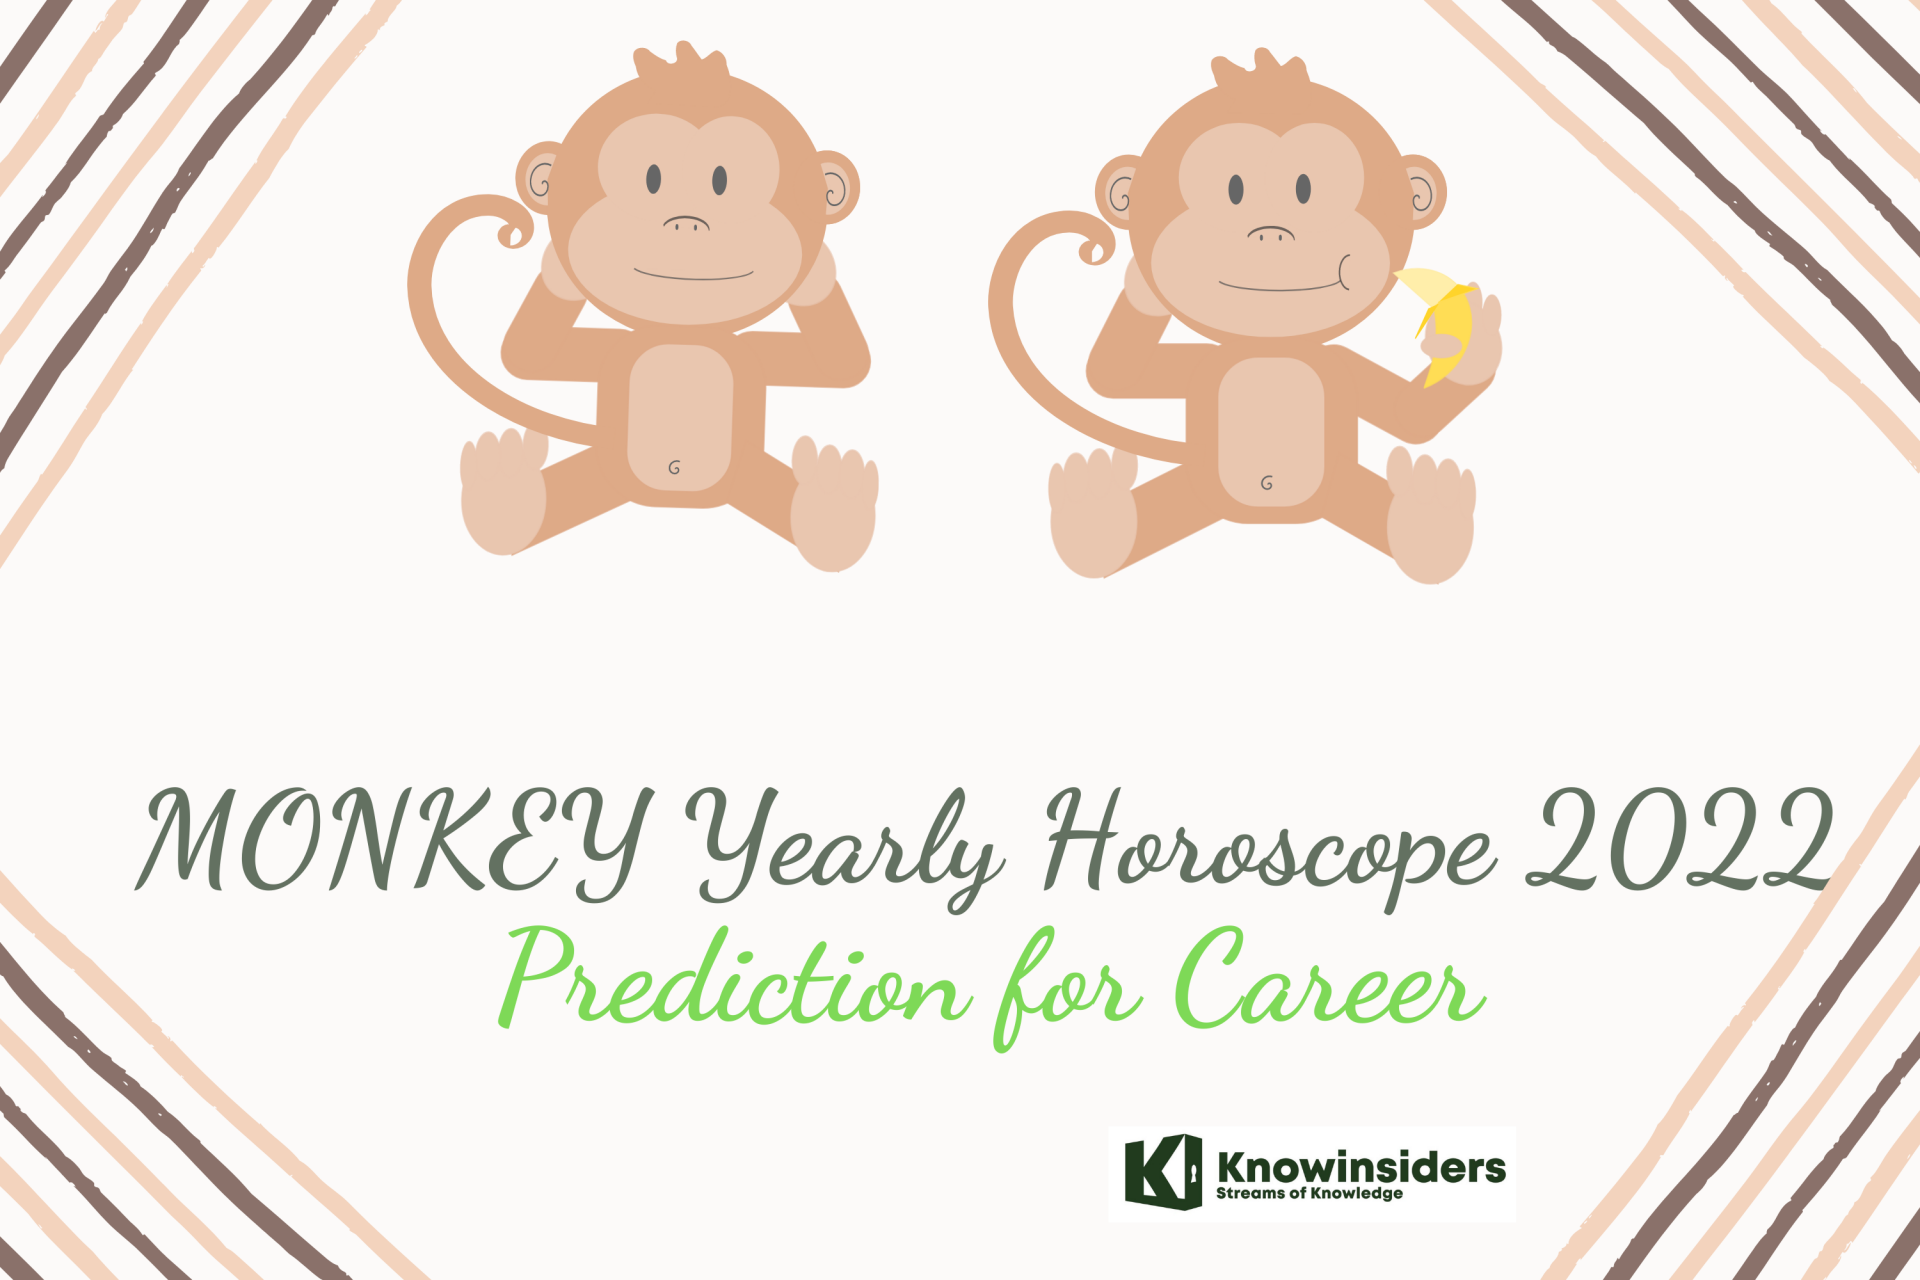 MONKEY Yearly Horoscope 2022 – Feng Shui Prediction for Career, Job and Work